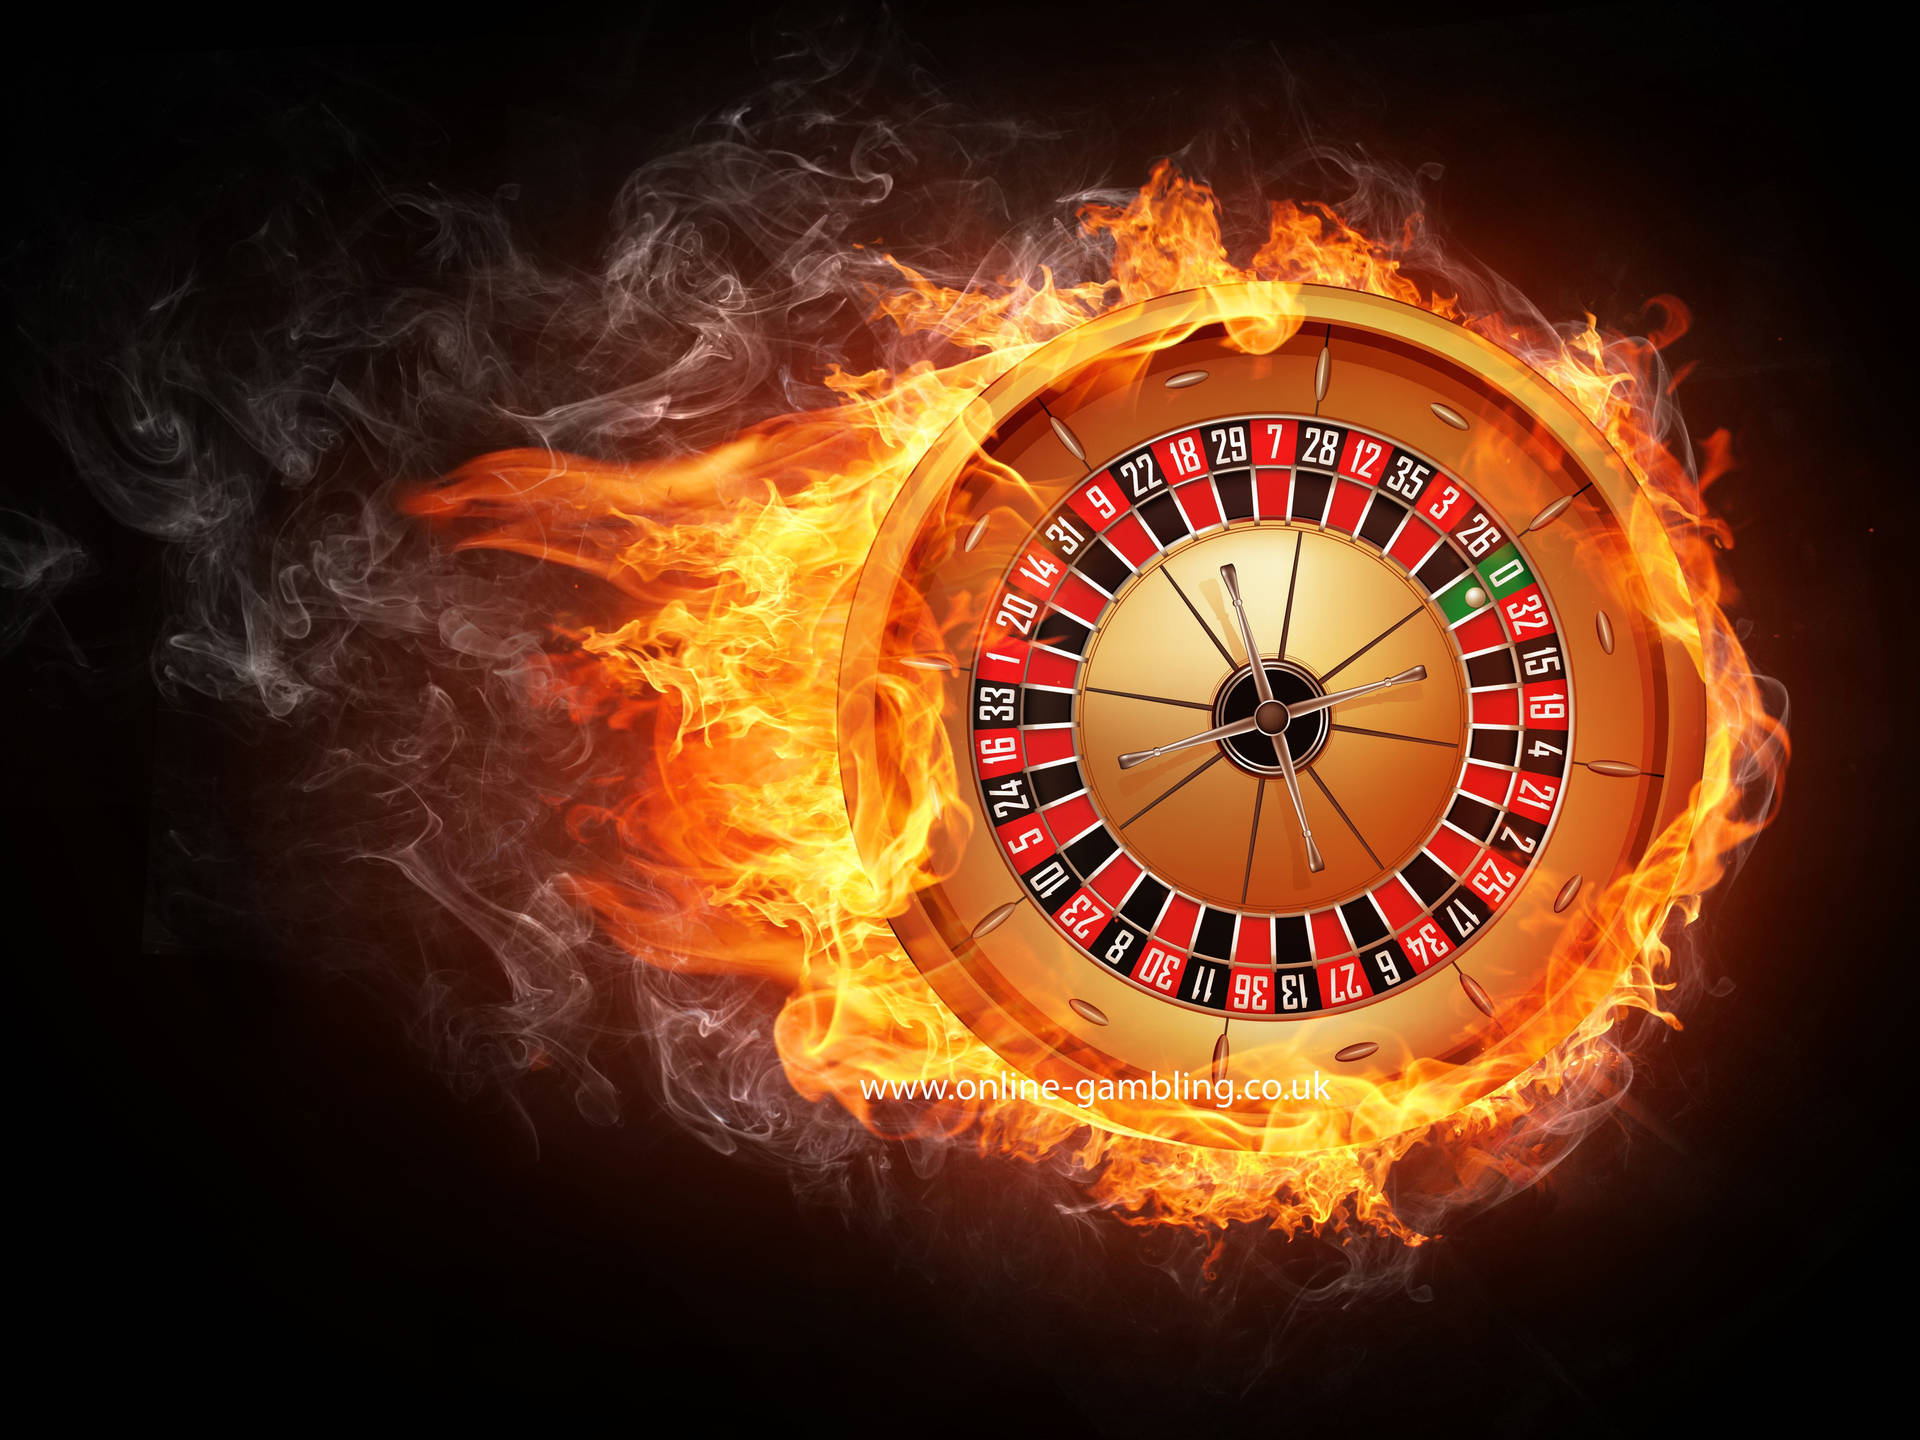 A Vibrant Display Of Roulette Wheel In Action Wallpaper